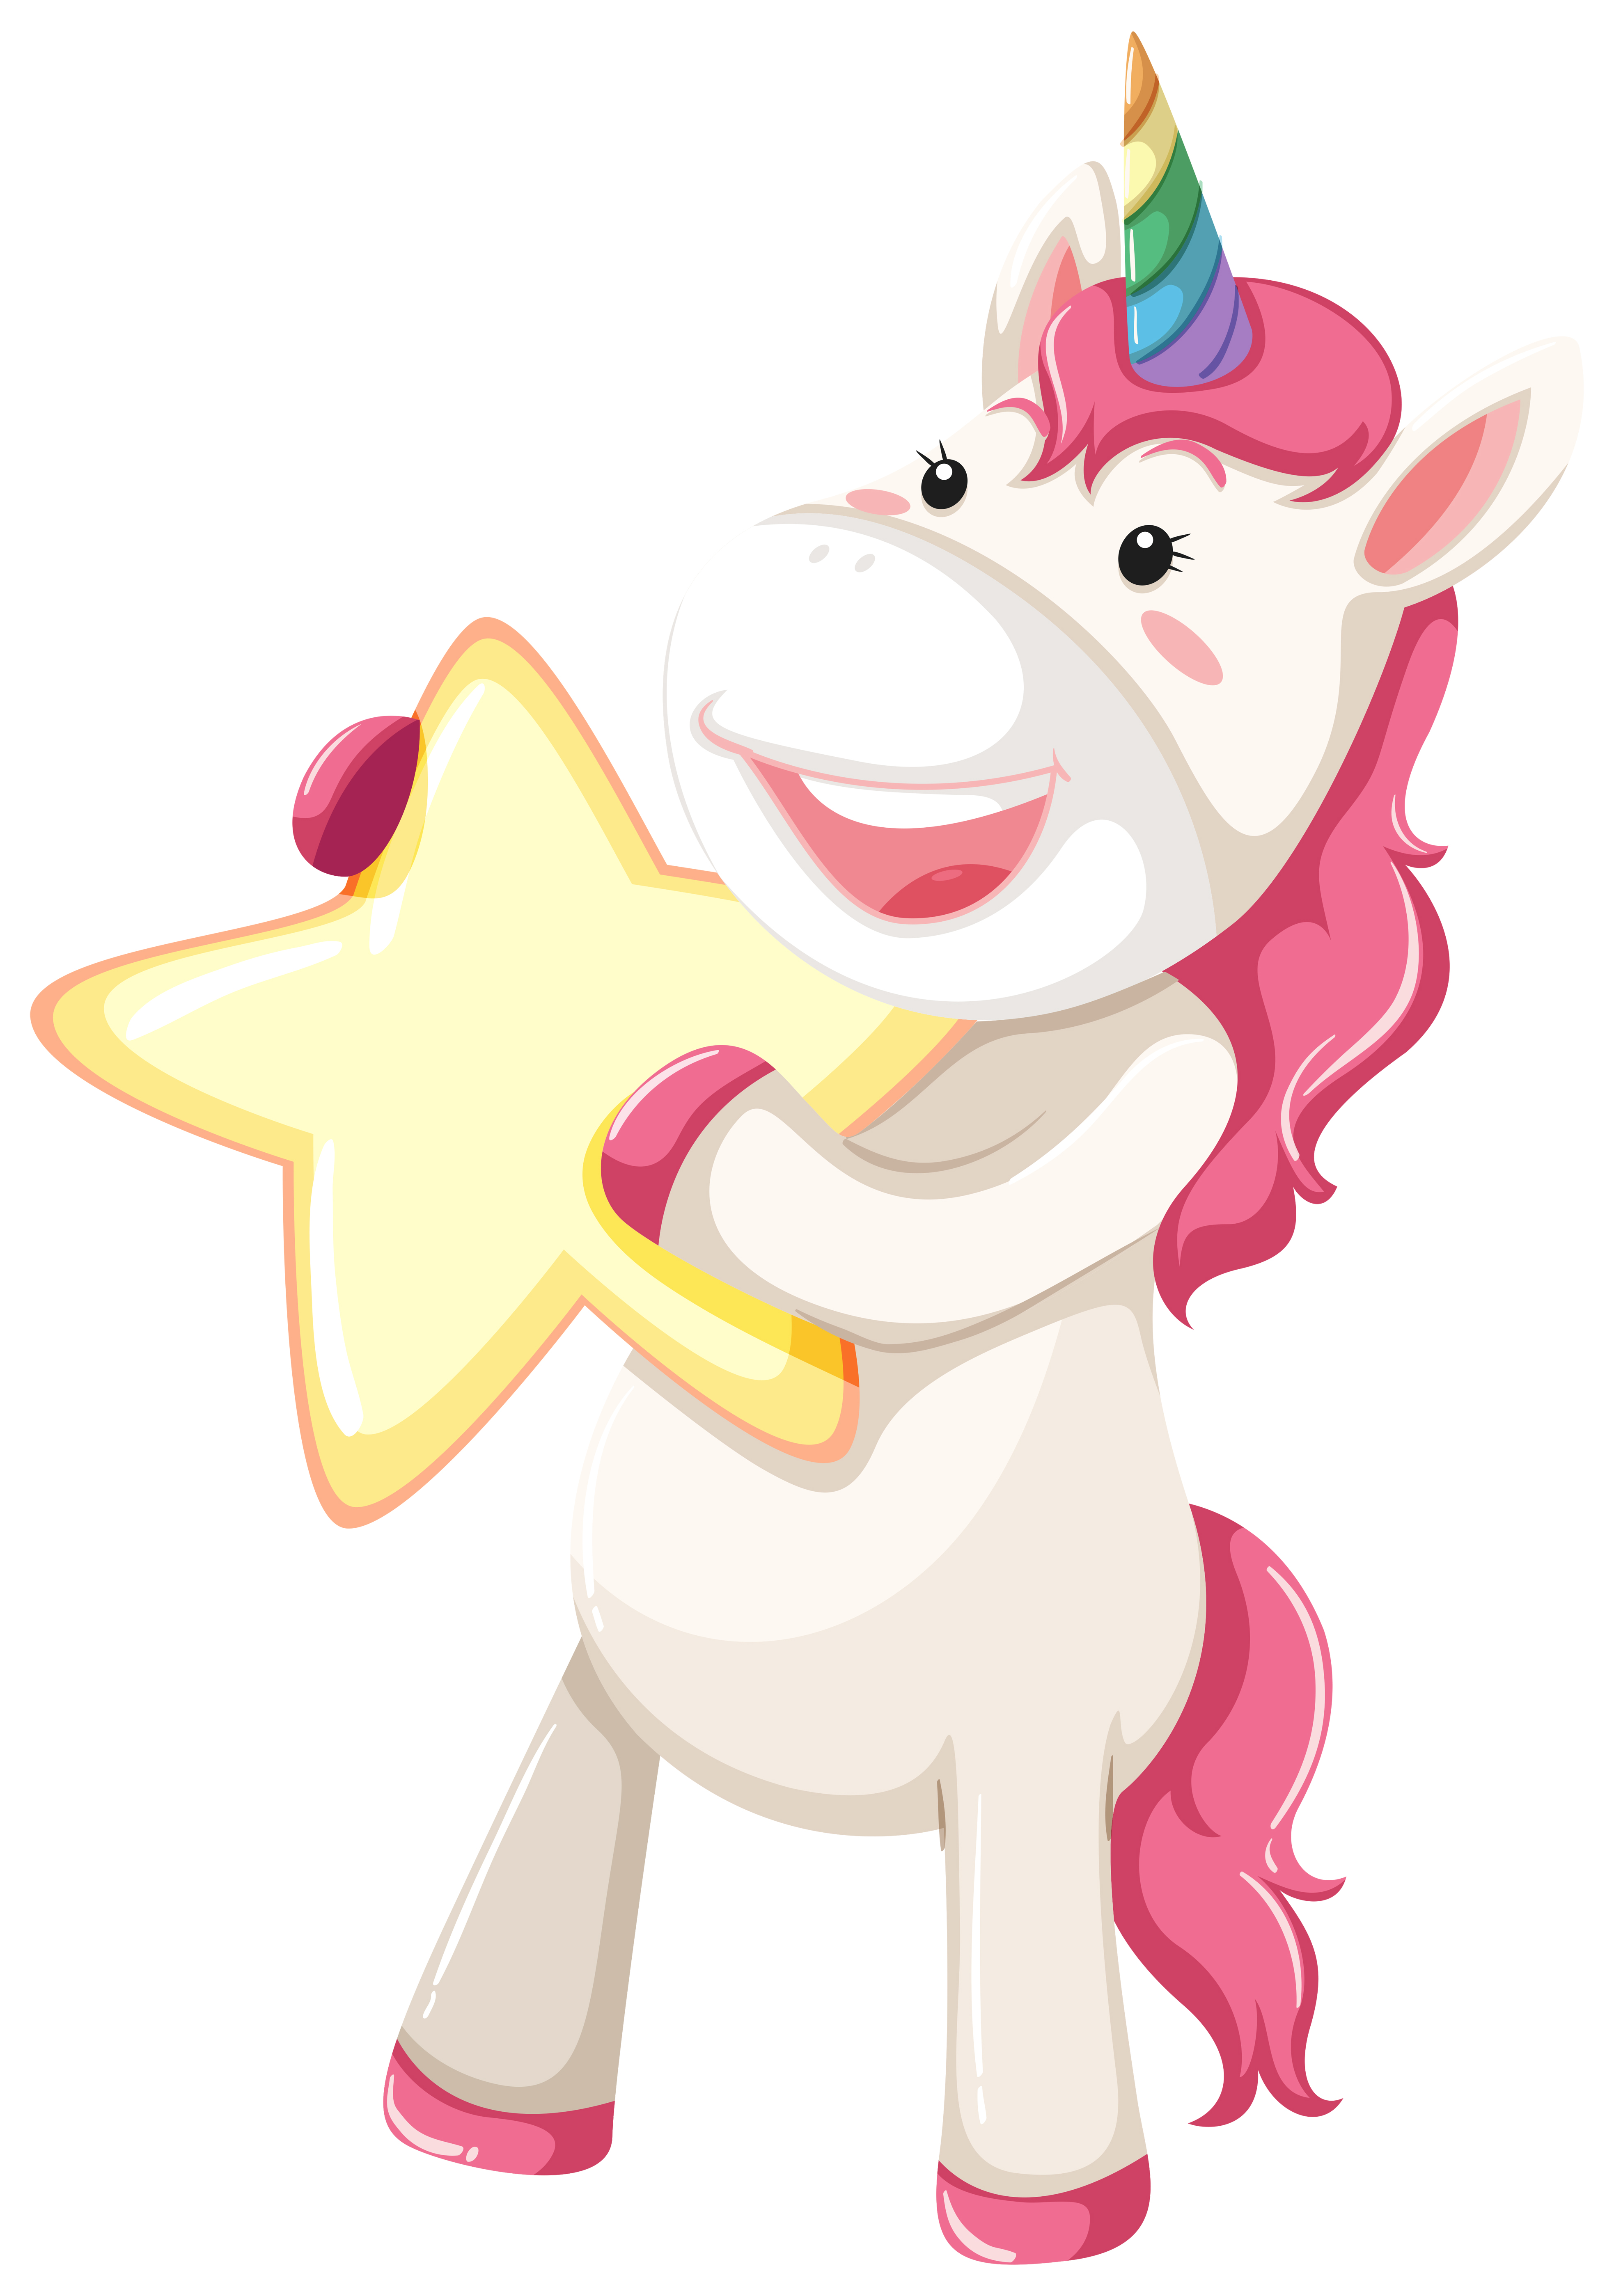  Cute  pink unicorn  holding star 297113 Download Free 